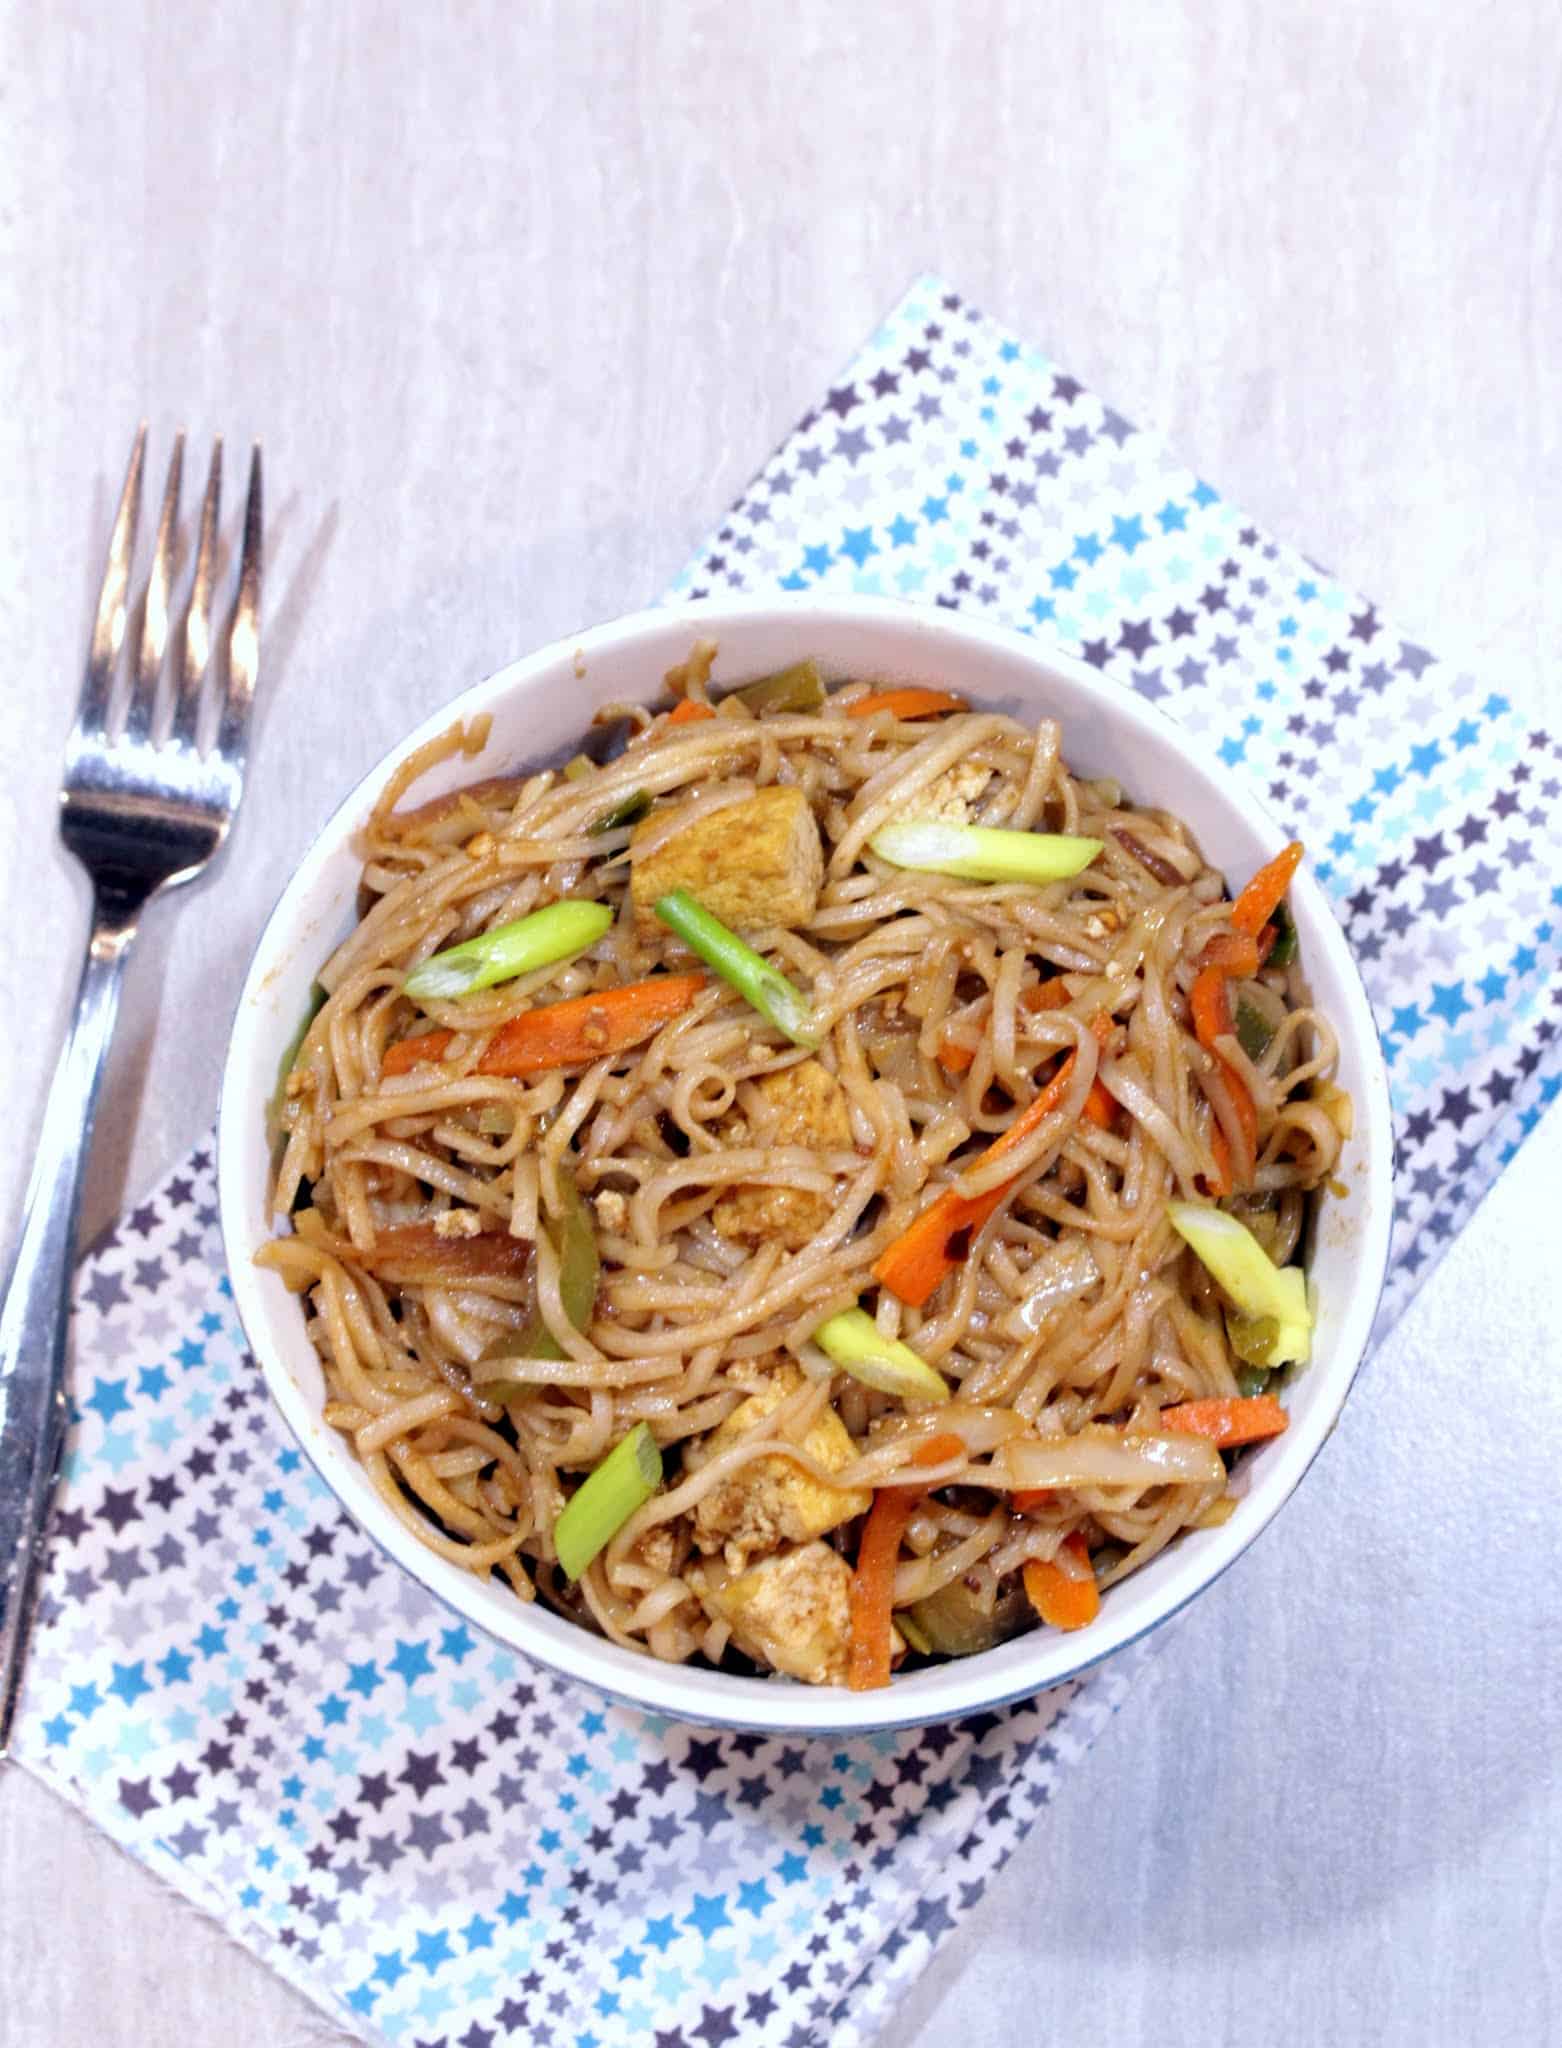 Hakka Noodles in a bowl with fork